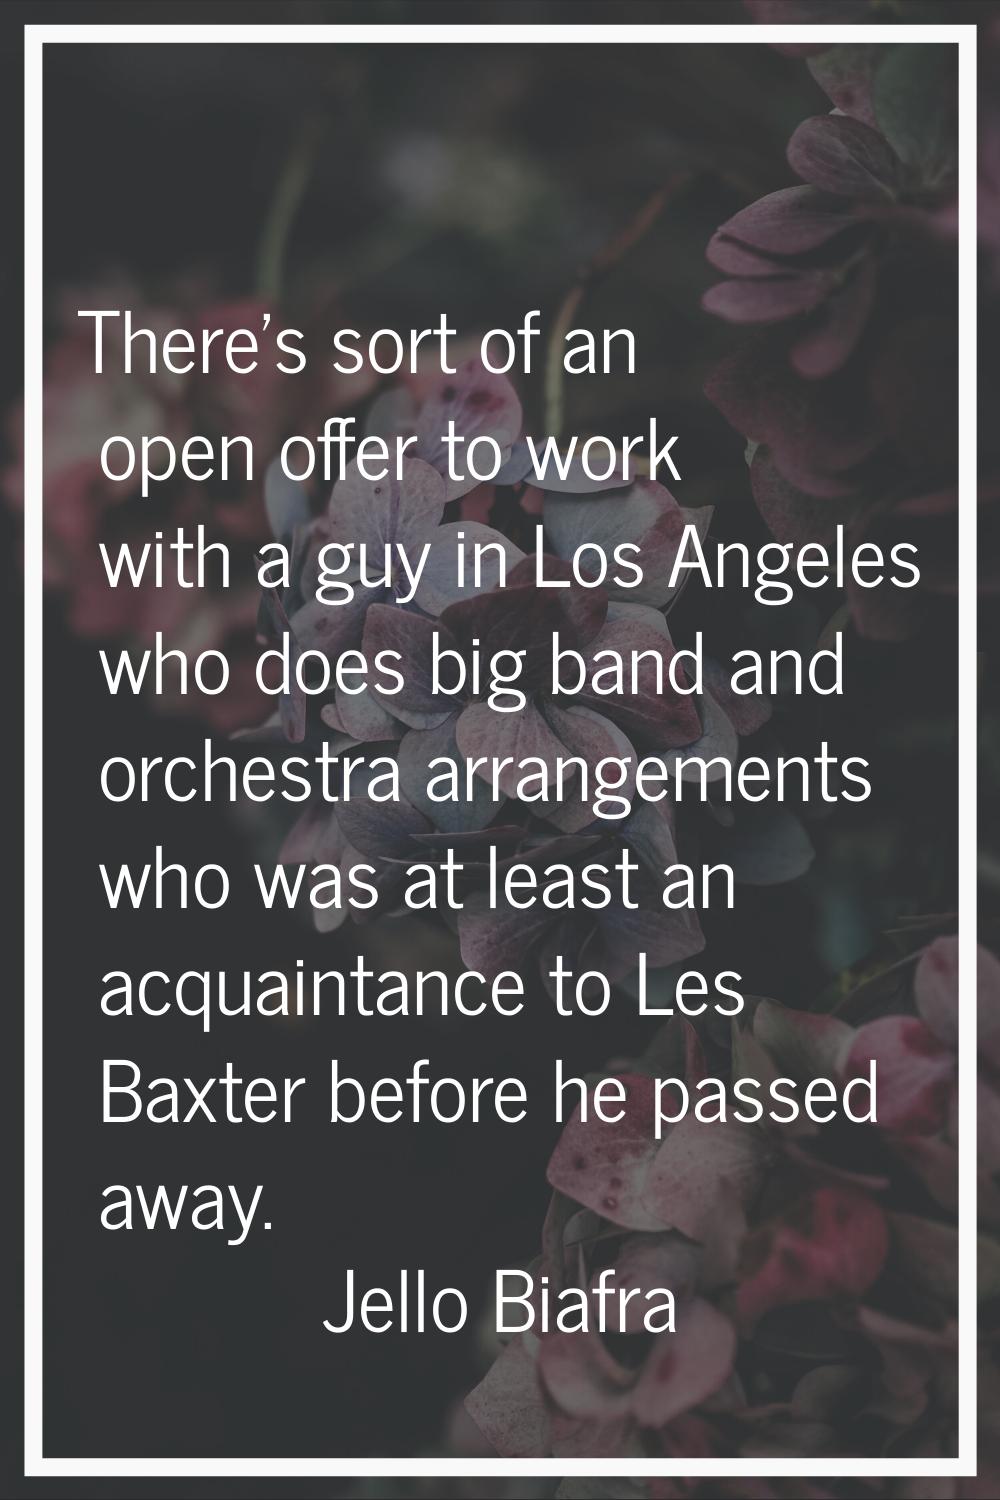 There's sort of an open offer to work with a guy in Los Angeles who does big band and orchestra arr